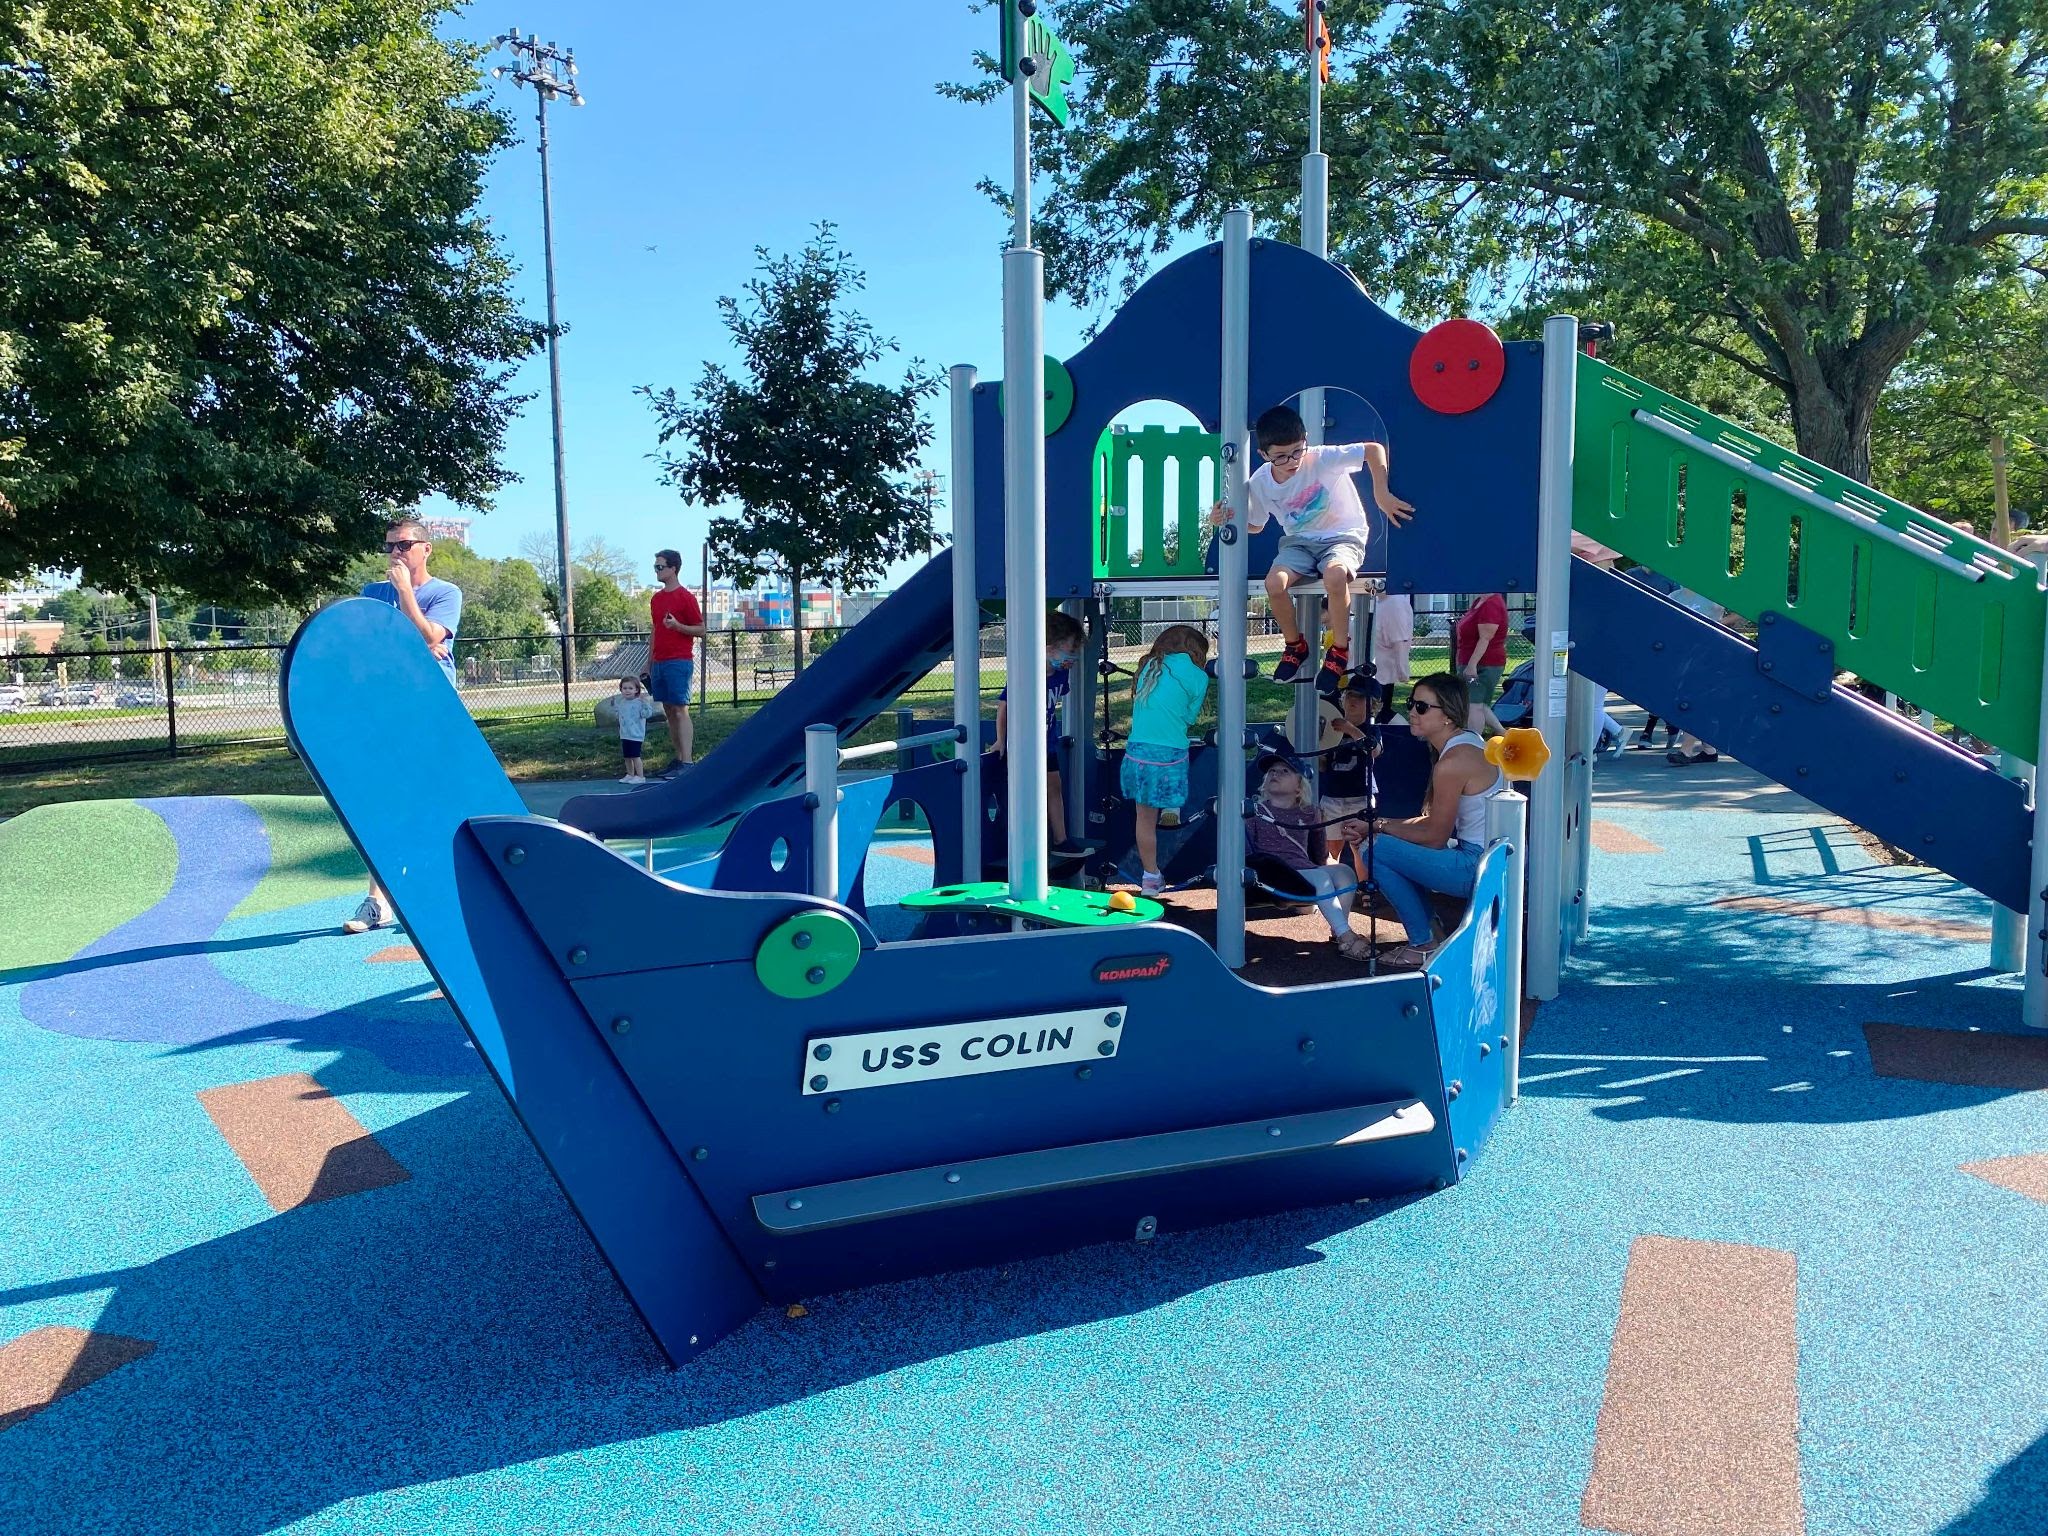 The “USS Colin” provides a fantastical space for South Boston children at the new play lot opened by the Boston Parks and Recreation Department on September 4 at Medal of Honor Park in South Boston.